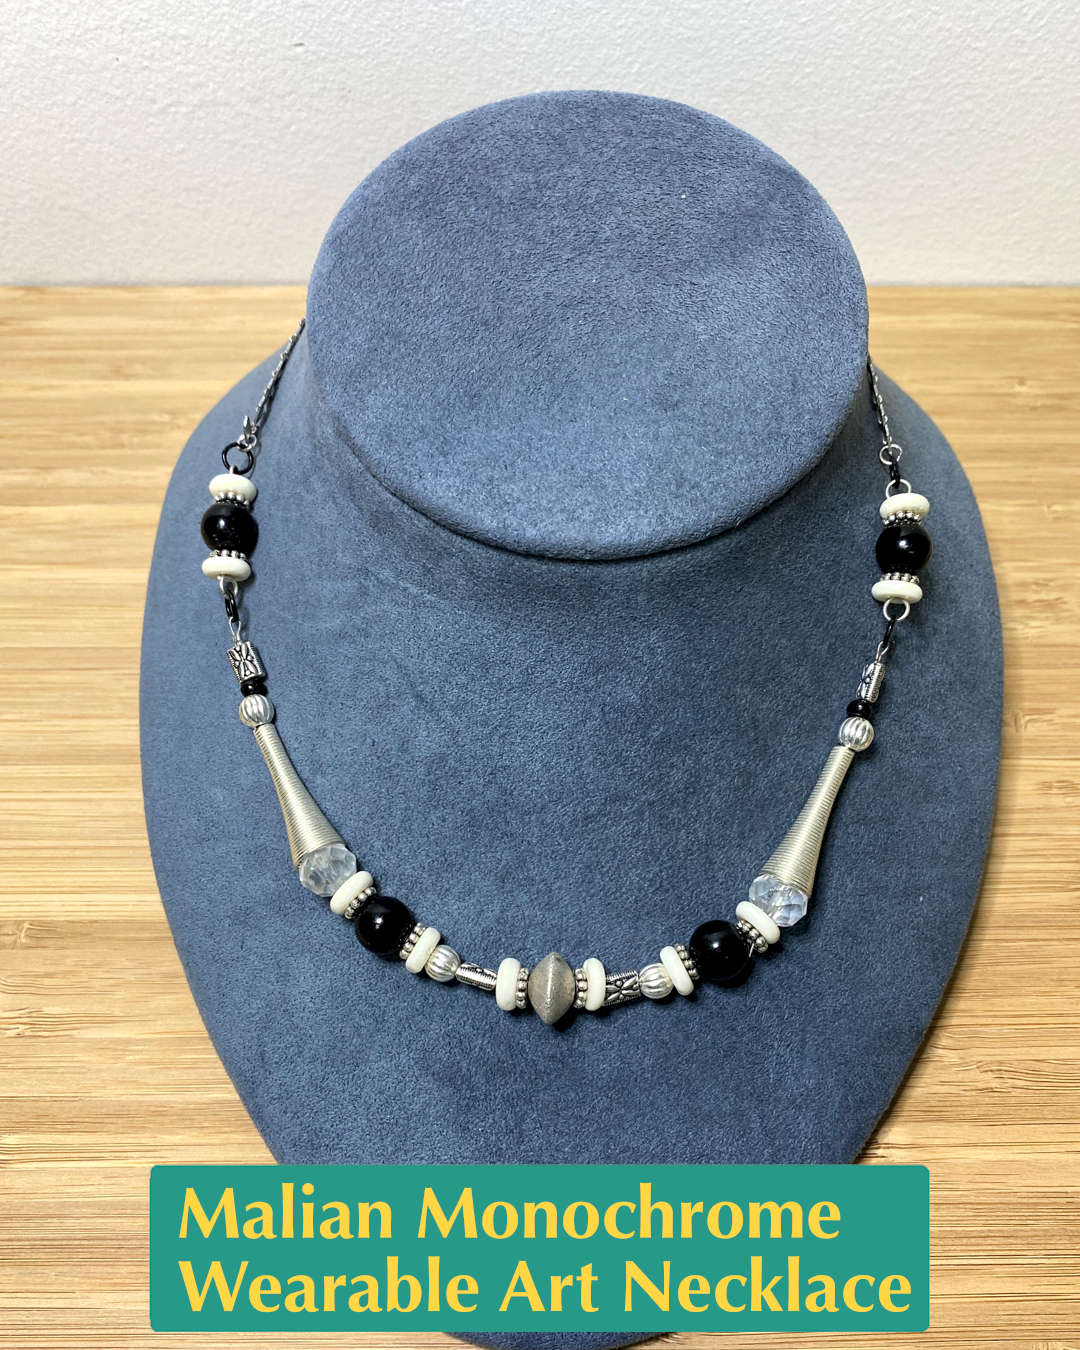 Handmade, wearable art necklace made from black and silver metals and different sized silver, black, white, and clear beads